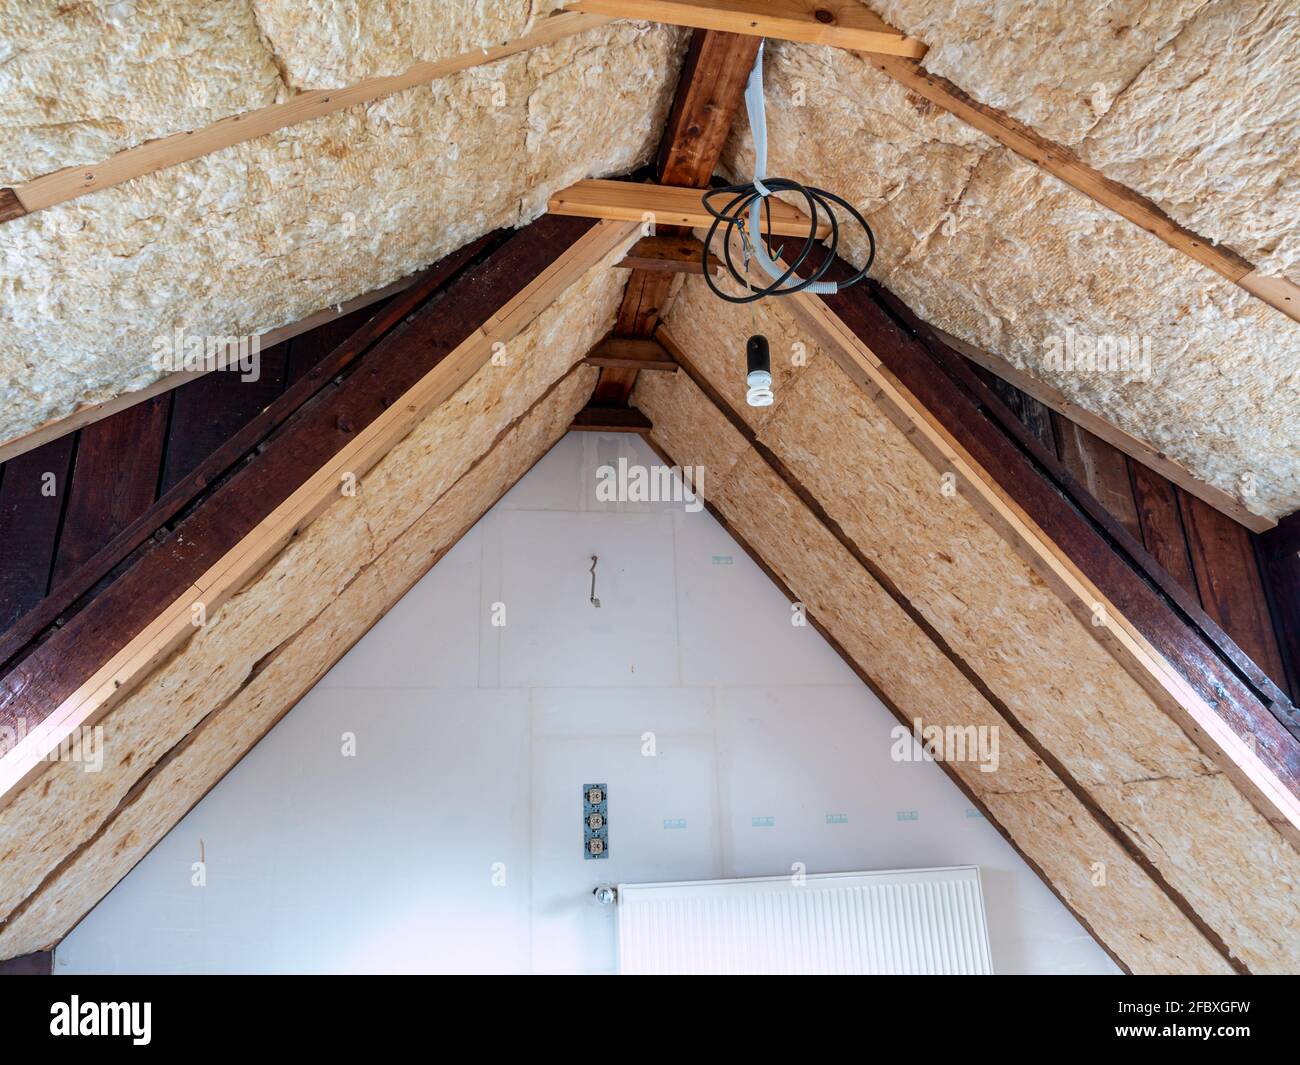 Expansion of a roof structure in the house Stock Photo